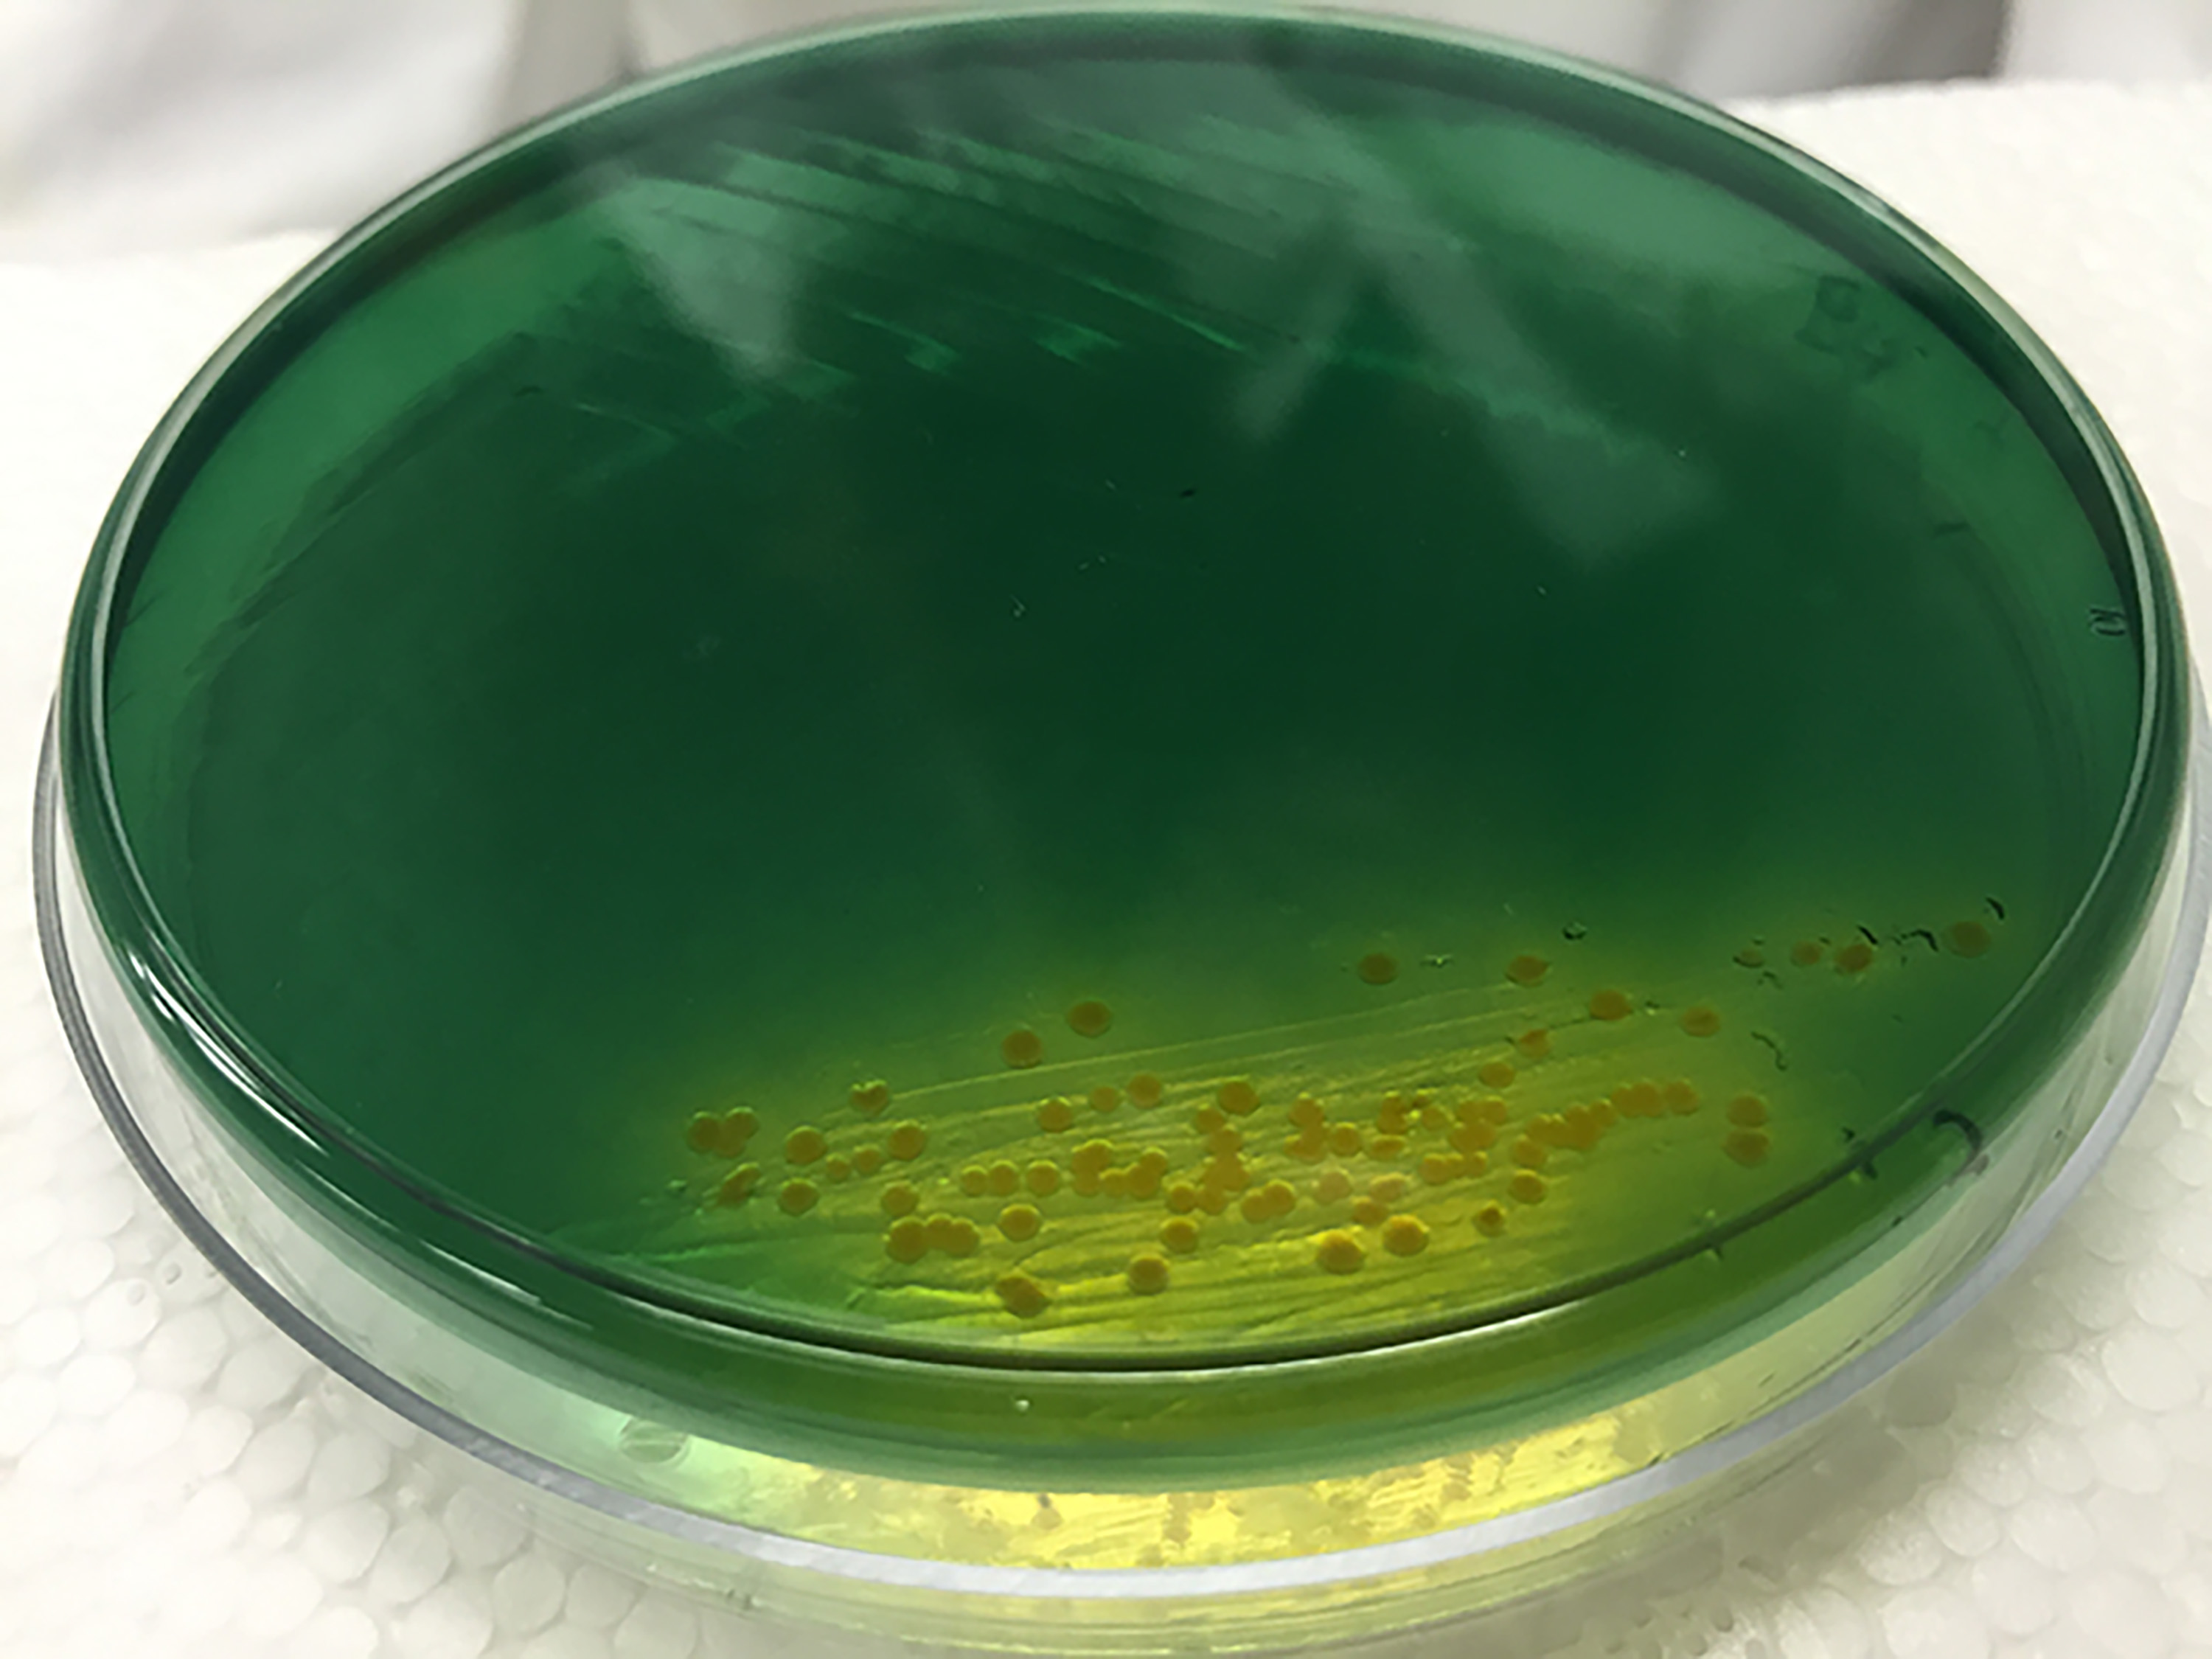 Image shows cholera colonies (yellow) growing on an agar plate. Growth of the bacterium was part of research into the diversity and resourcefulness of the bacterium. (Credit: John Toon, Georgia Tech)